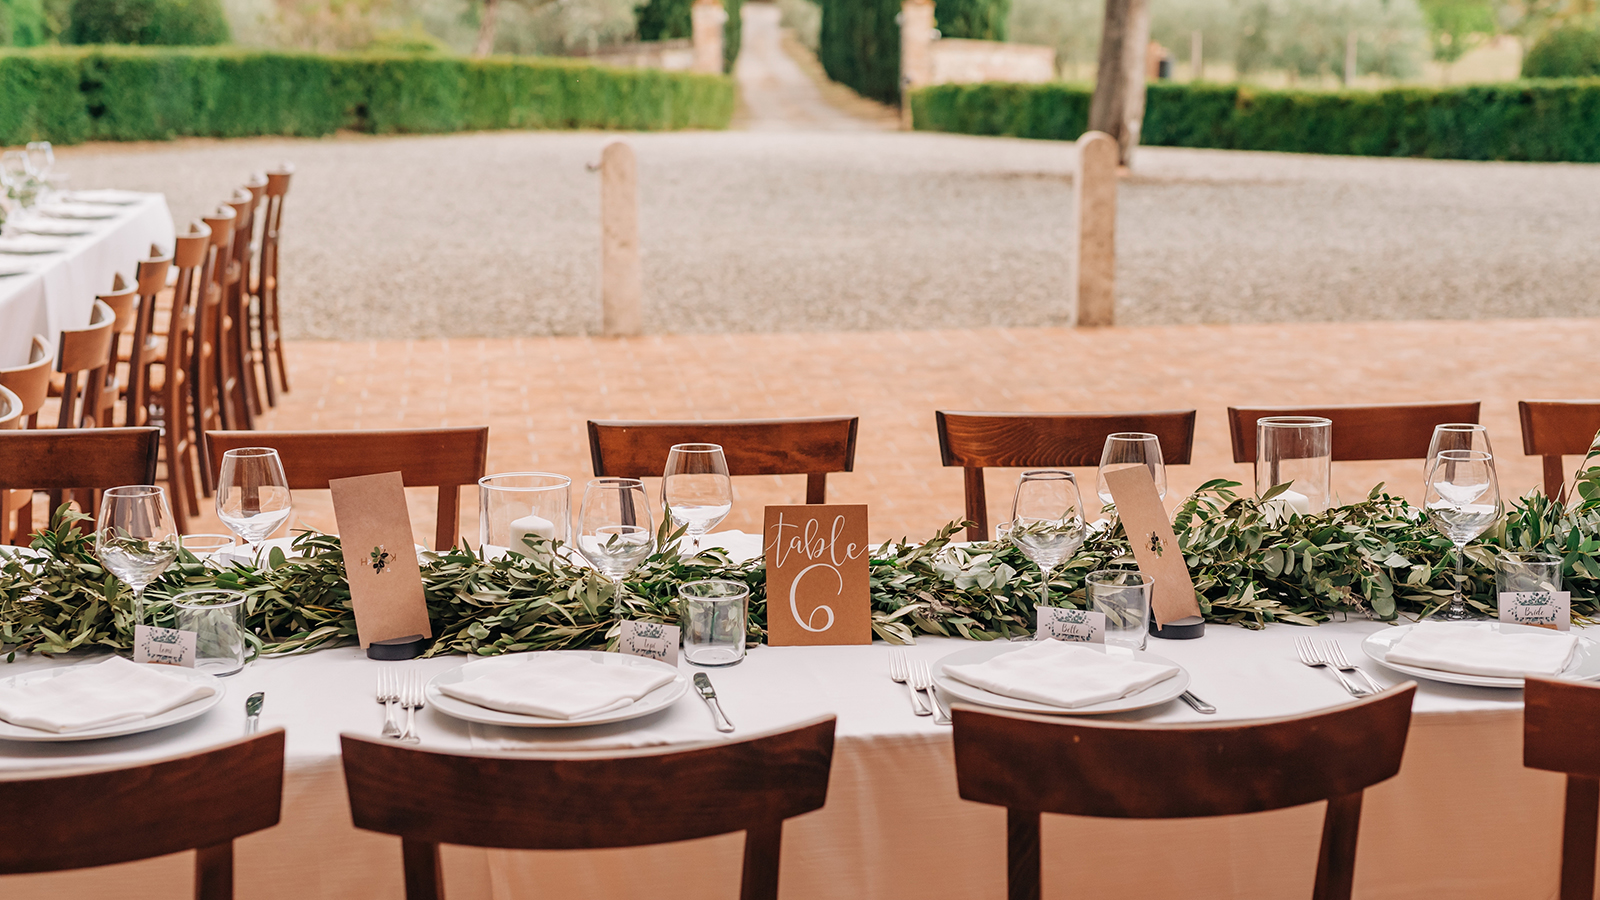 Wedding decor for dinner in a villa in nature. Rectangular long tables are decorated with greenery and olive branches. Rustic wedding decor